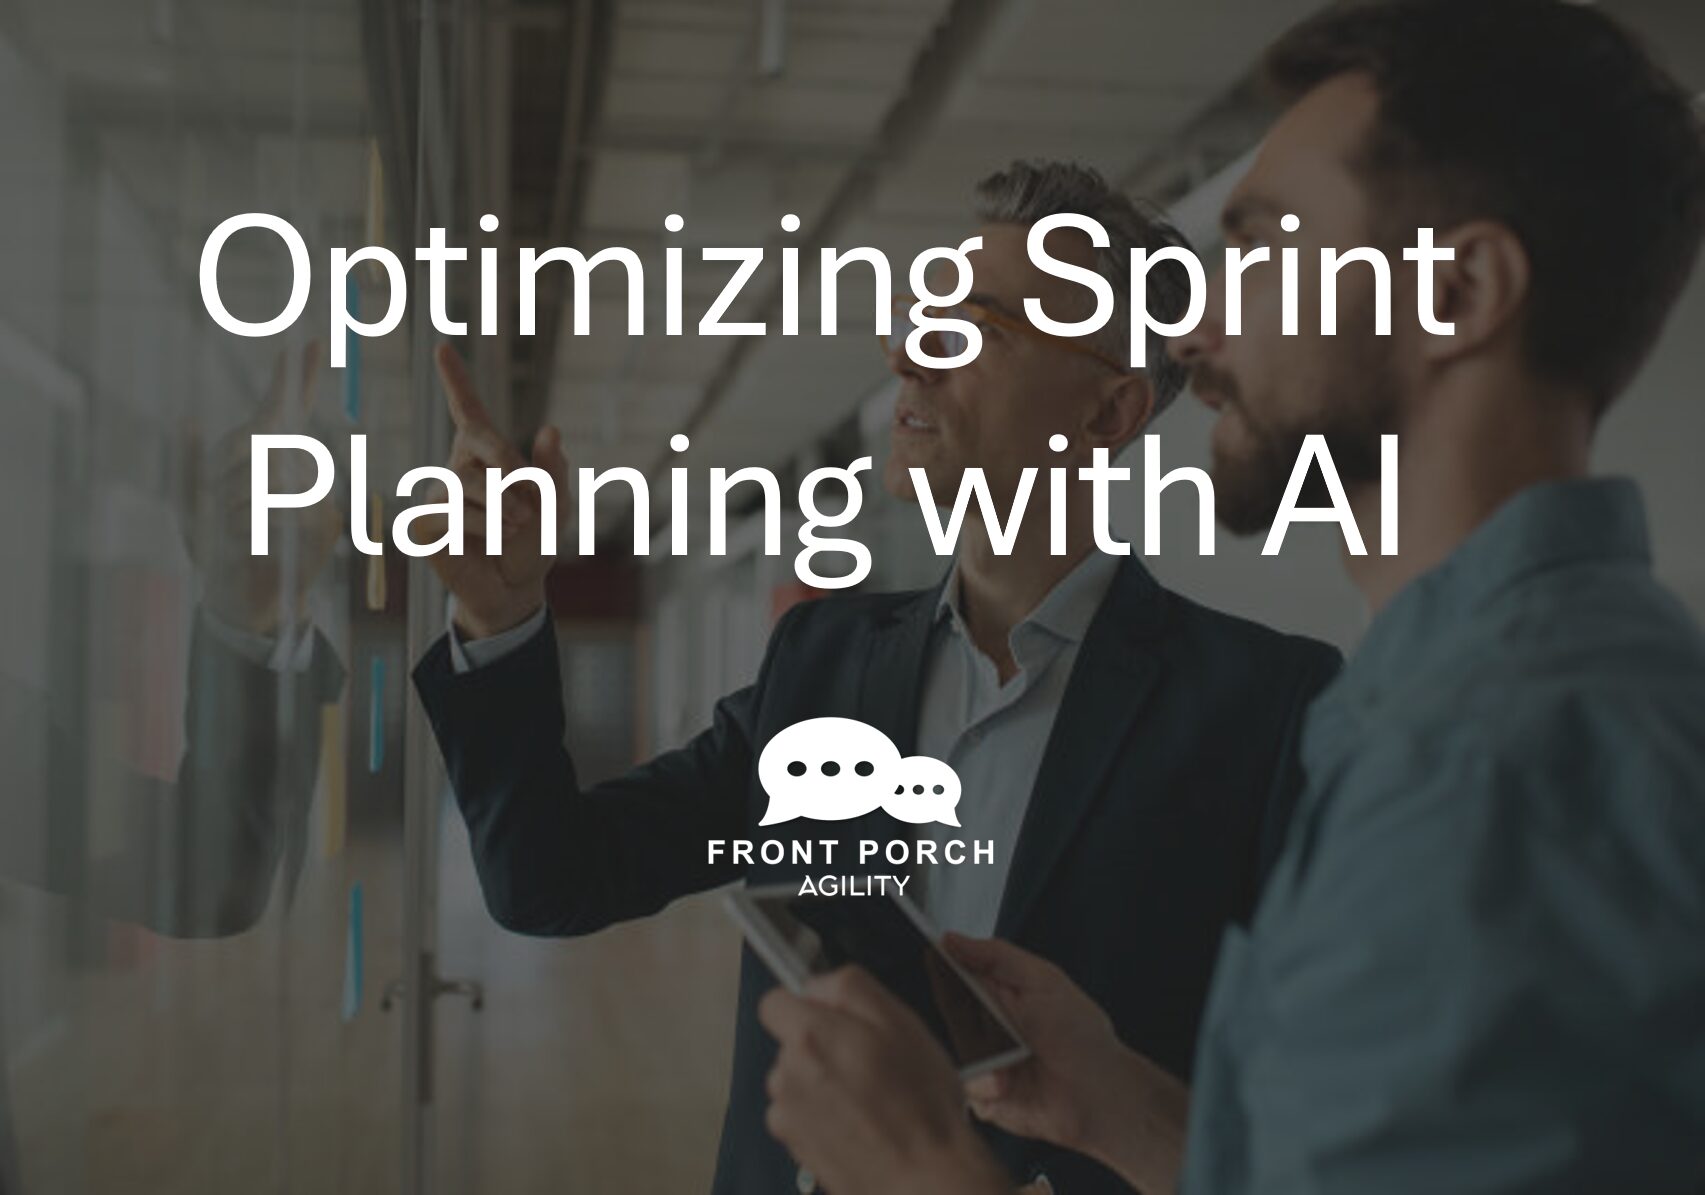 Optimizing Sprint Planning with AI